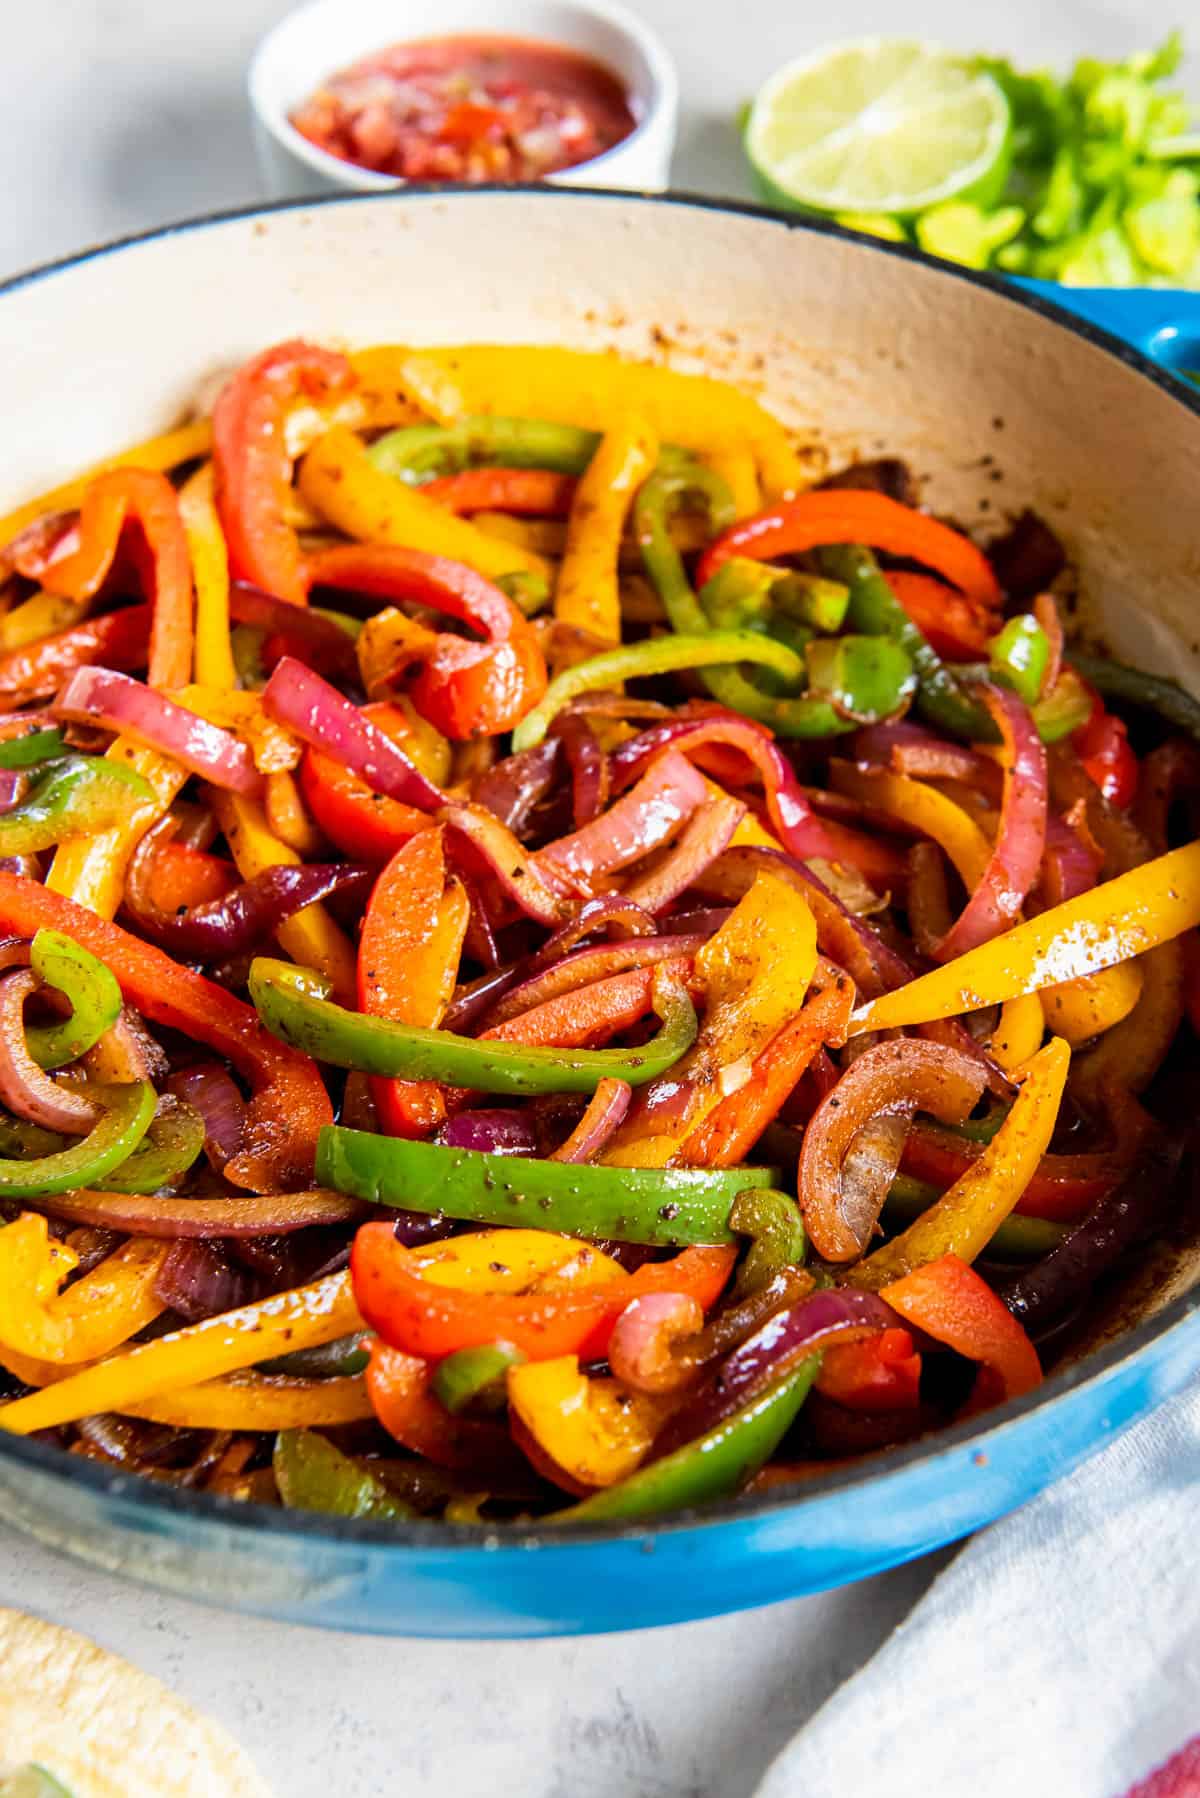 Fajita veggies cooked in a blue enameled cast iron skillet that is ready for serving.